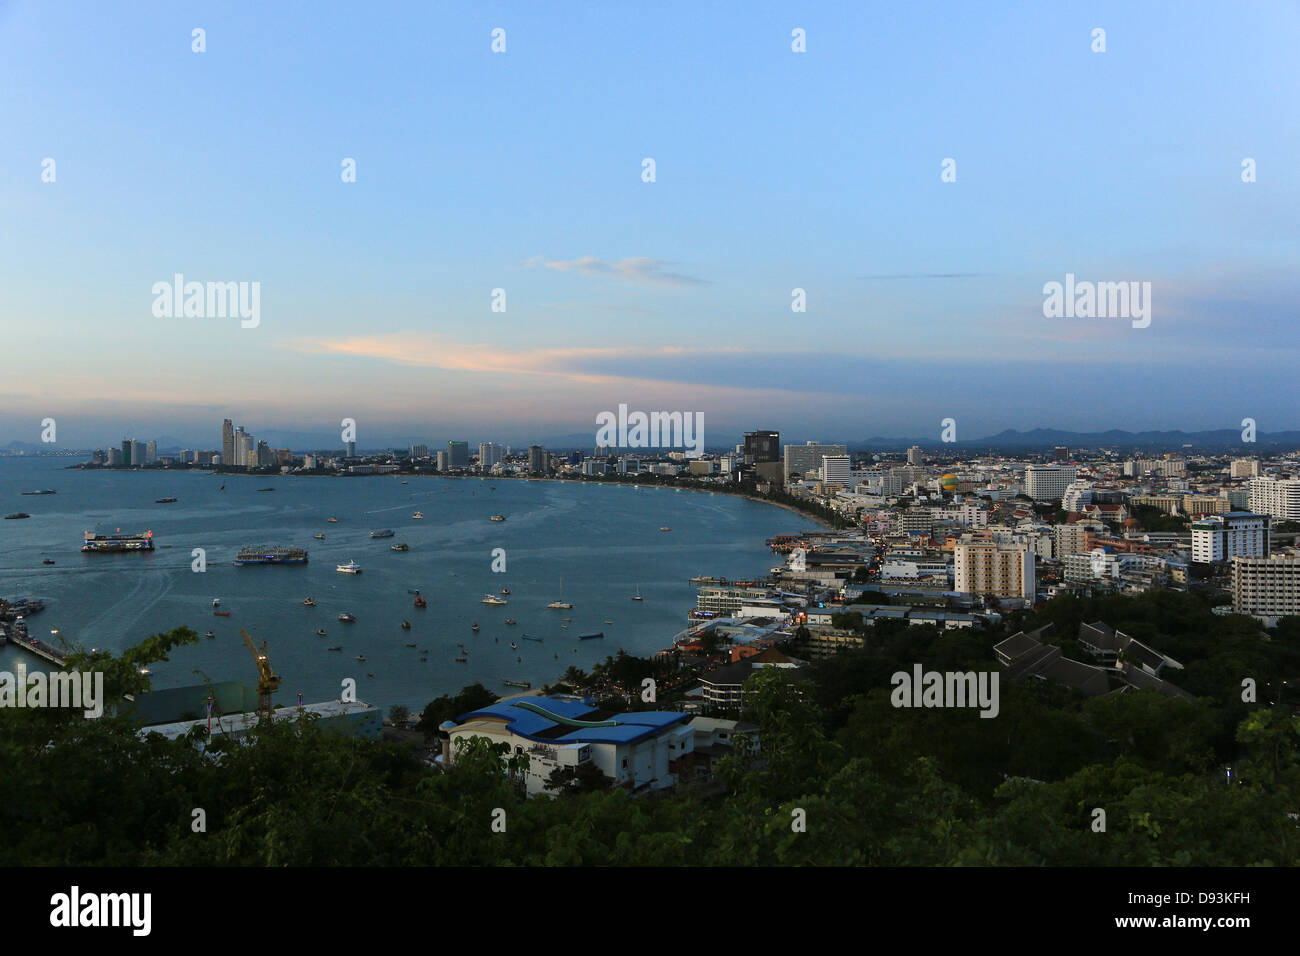 Pattaya bay and cityscape from above, Thailand Stock Photo